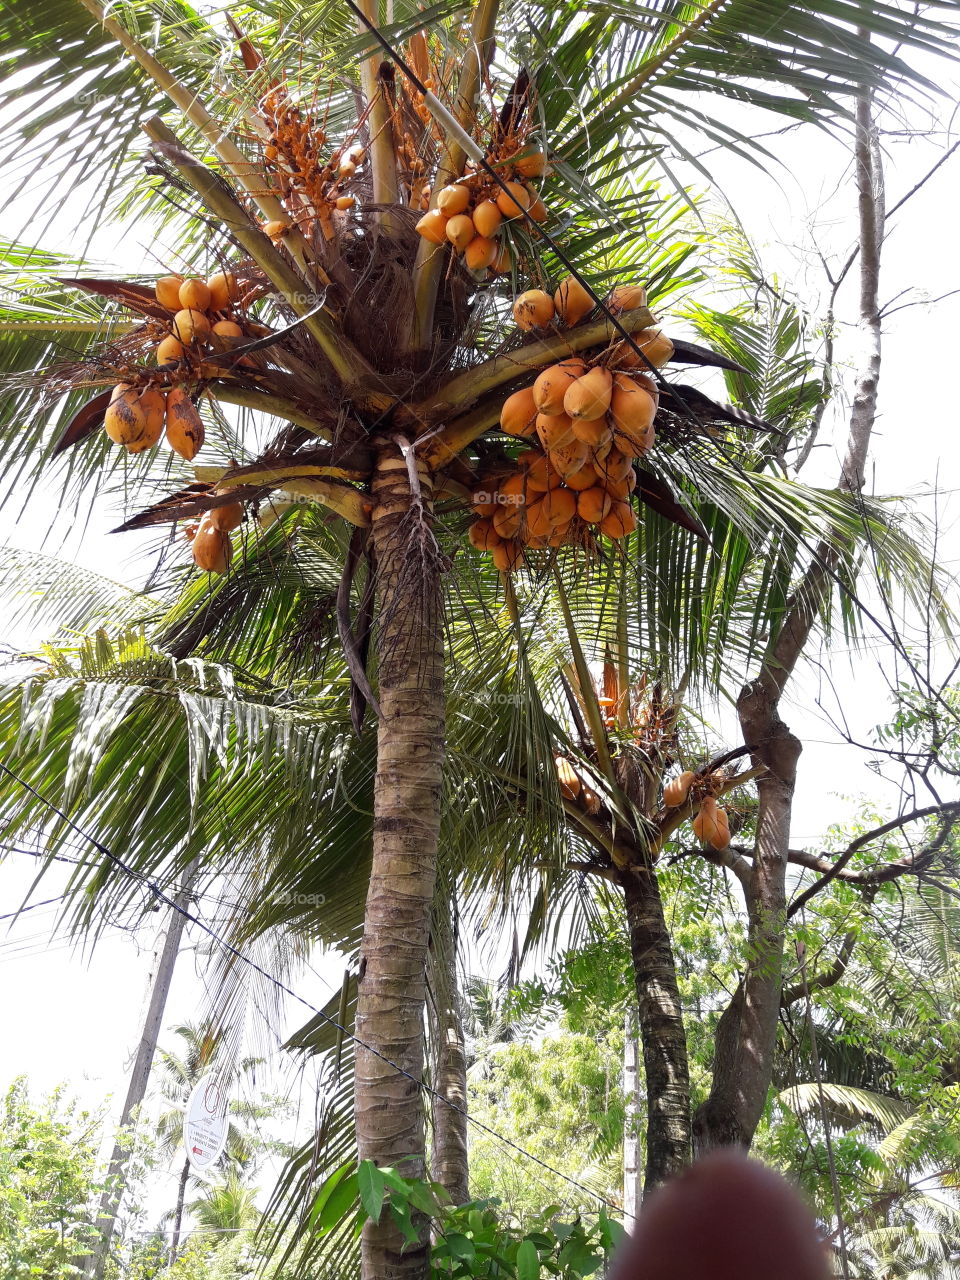 k
King cocanuts are smiling with you at A02 Road,Pelana, Weligama.,near Villa The Leaf , Srilanka.